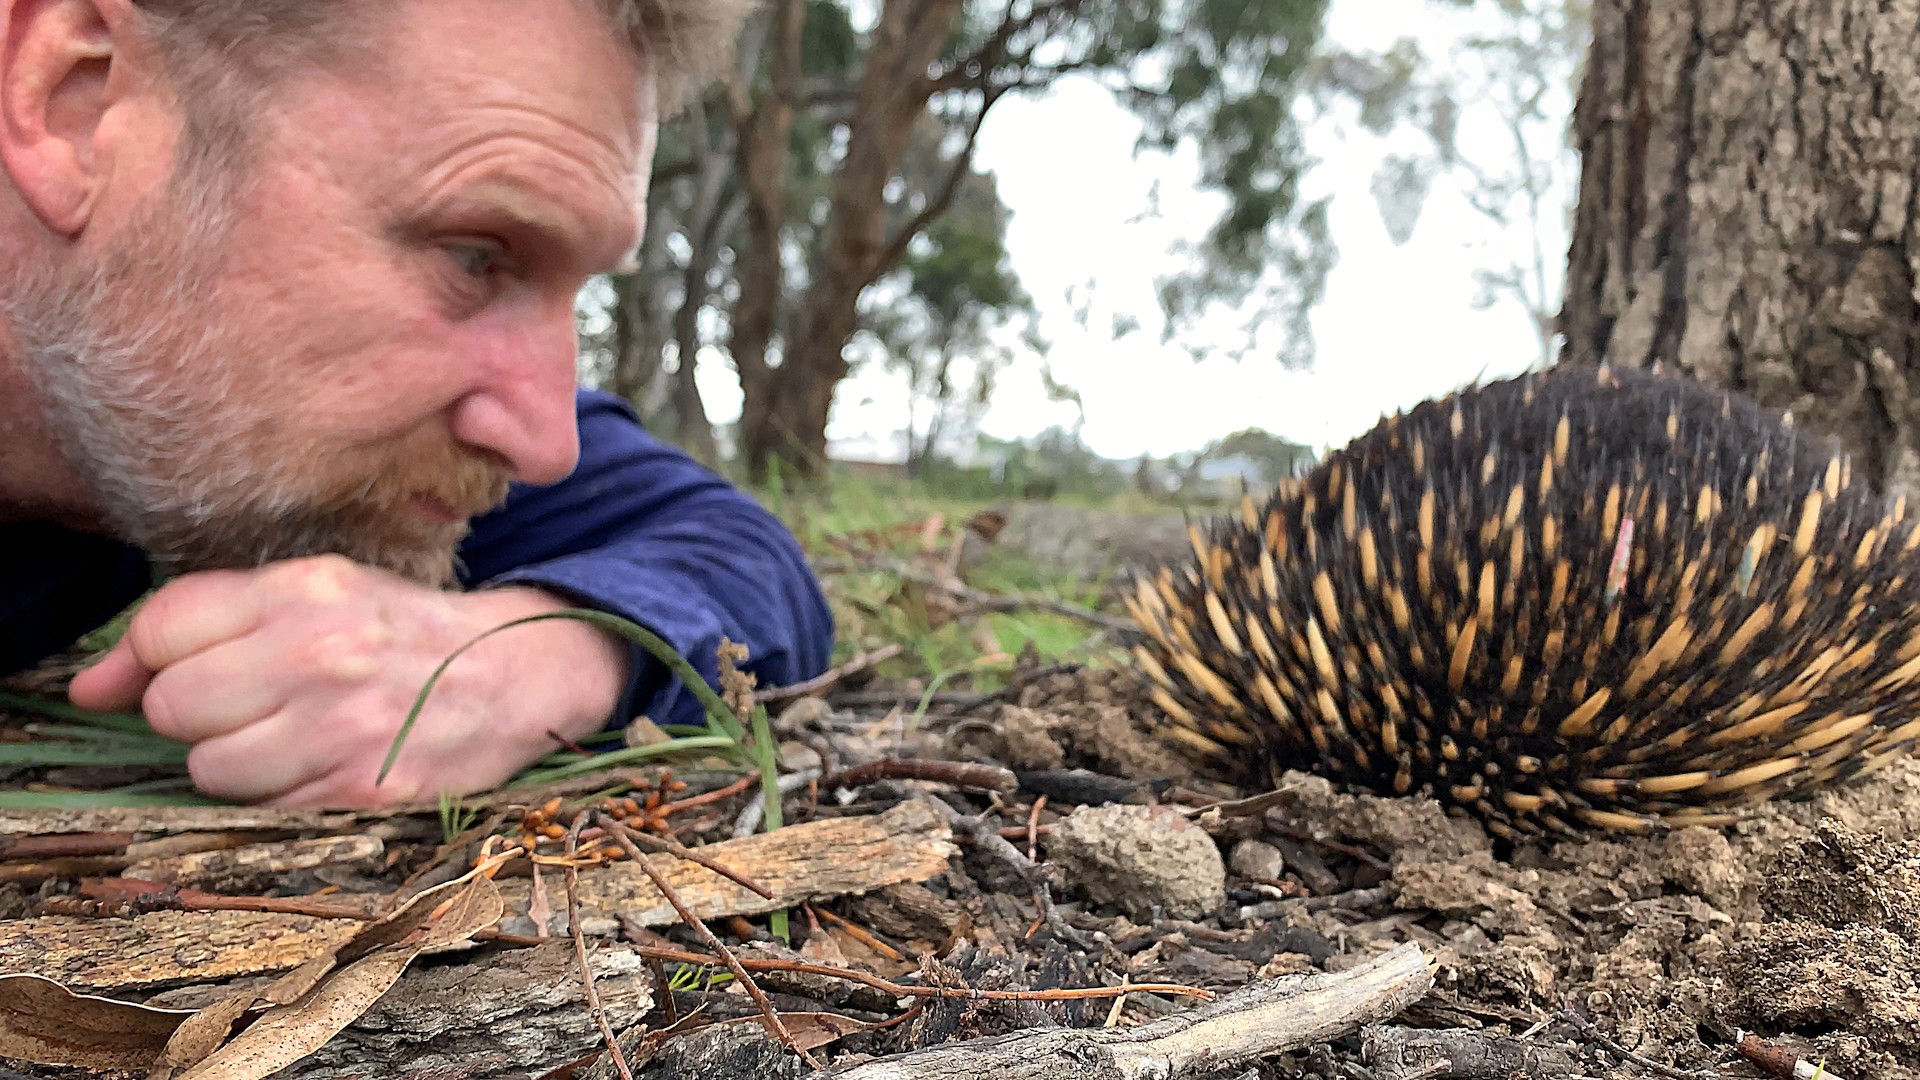 Wondering why there's a spike in interest in echidnas? Let's get straight to the point